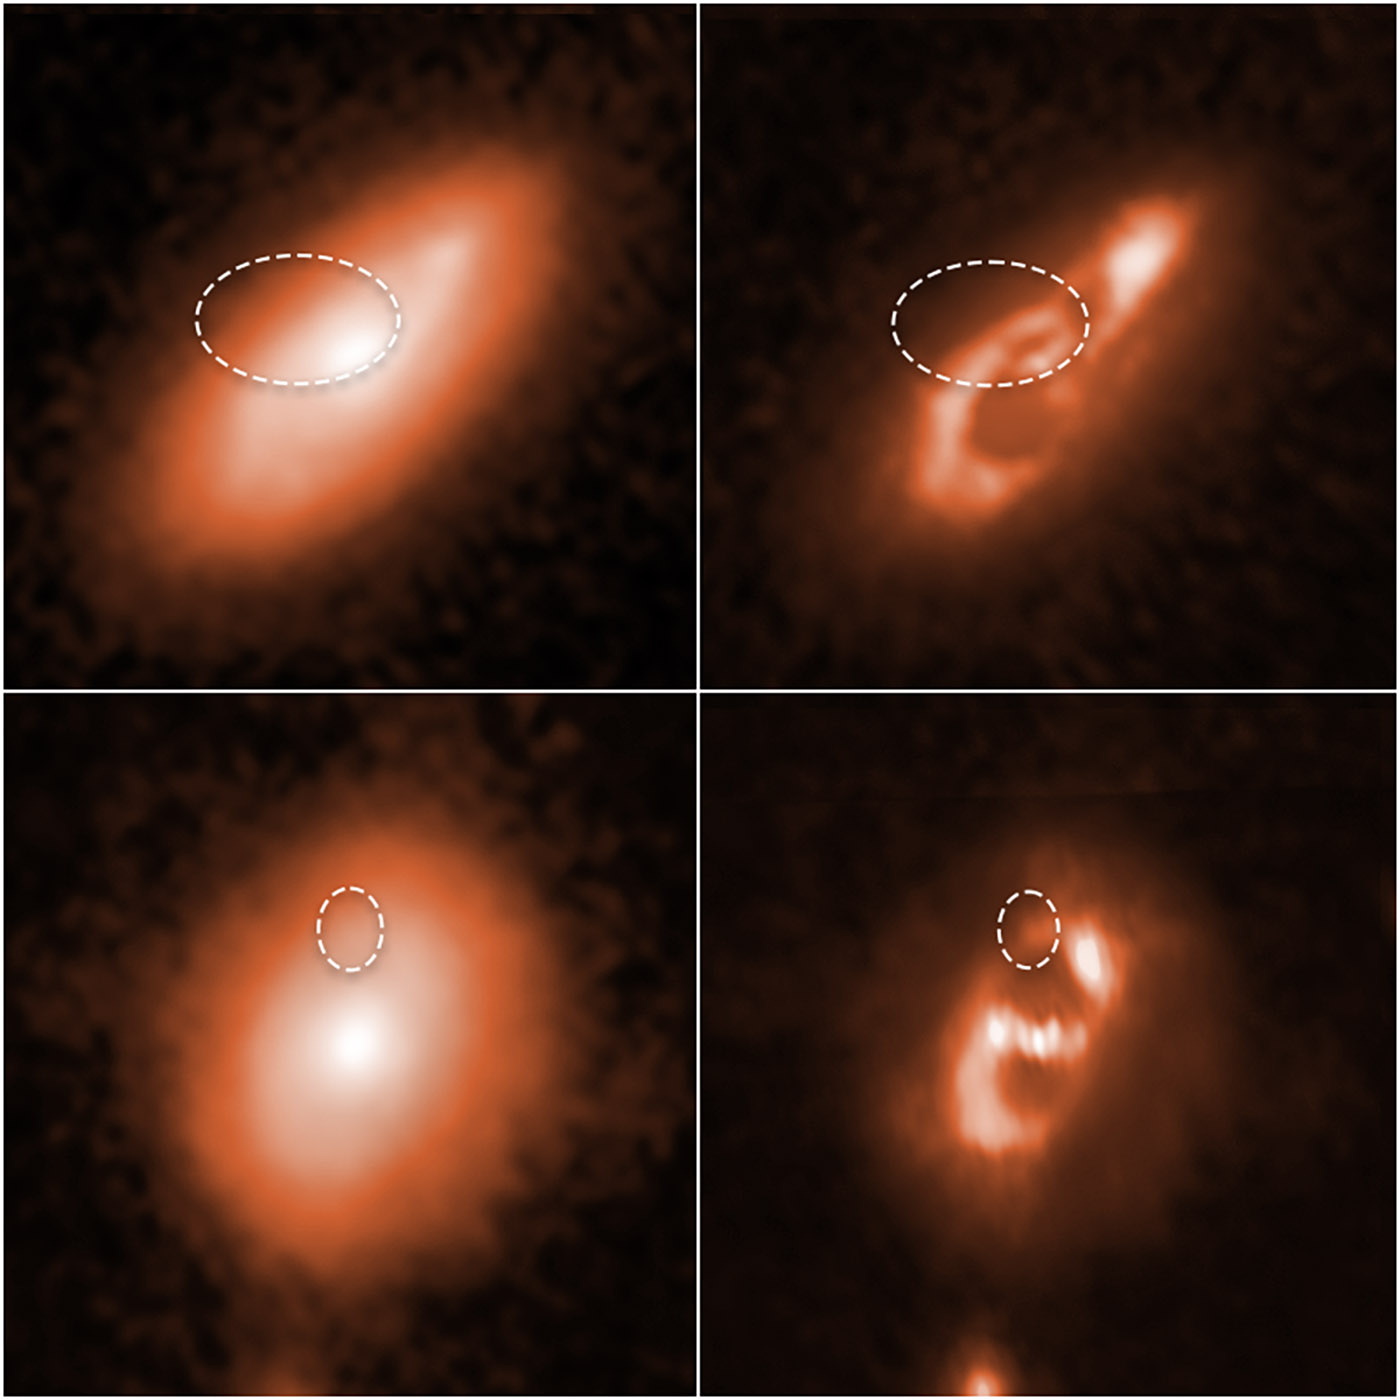 Astronomers using the Hubble Space Telescope have tracked down two brief, powerful radio bursts to the spiral arms of the two galaxies shown at top and bottom of this image. The catalogue names of the bursts are FRB 190714, top row, and FRB 180924, bottom row.

The galaxies are far from Earth, appearing as they looked billions of years ago. The dotted oval lines in each of the four images mark the location of the brilliant radio flares. The two images at left show the full Hubble snapshots of each galaxy.